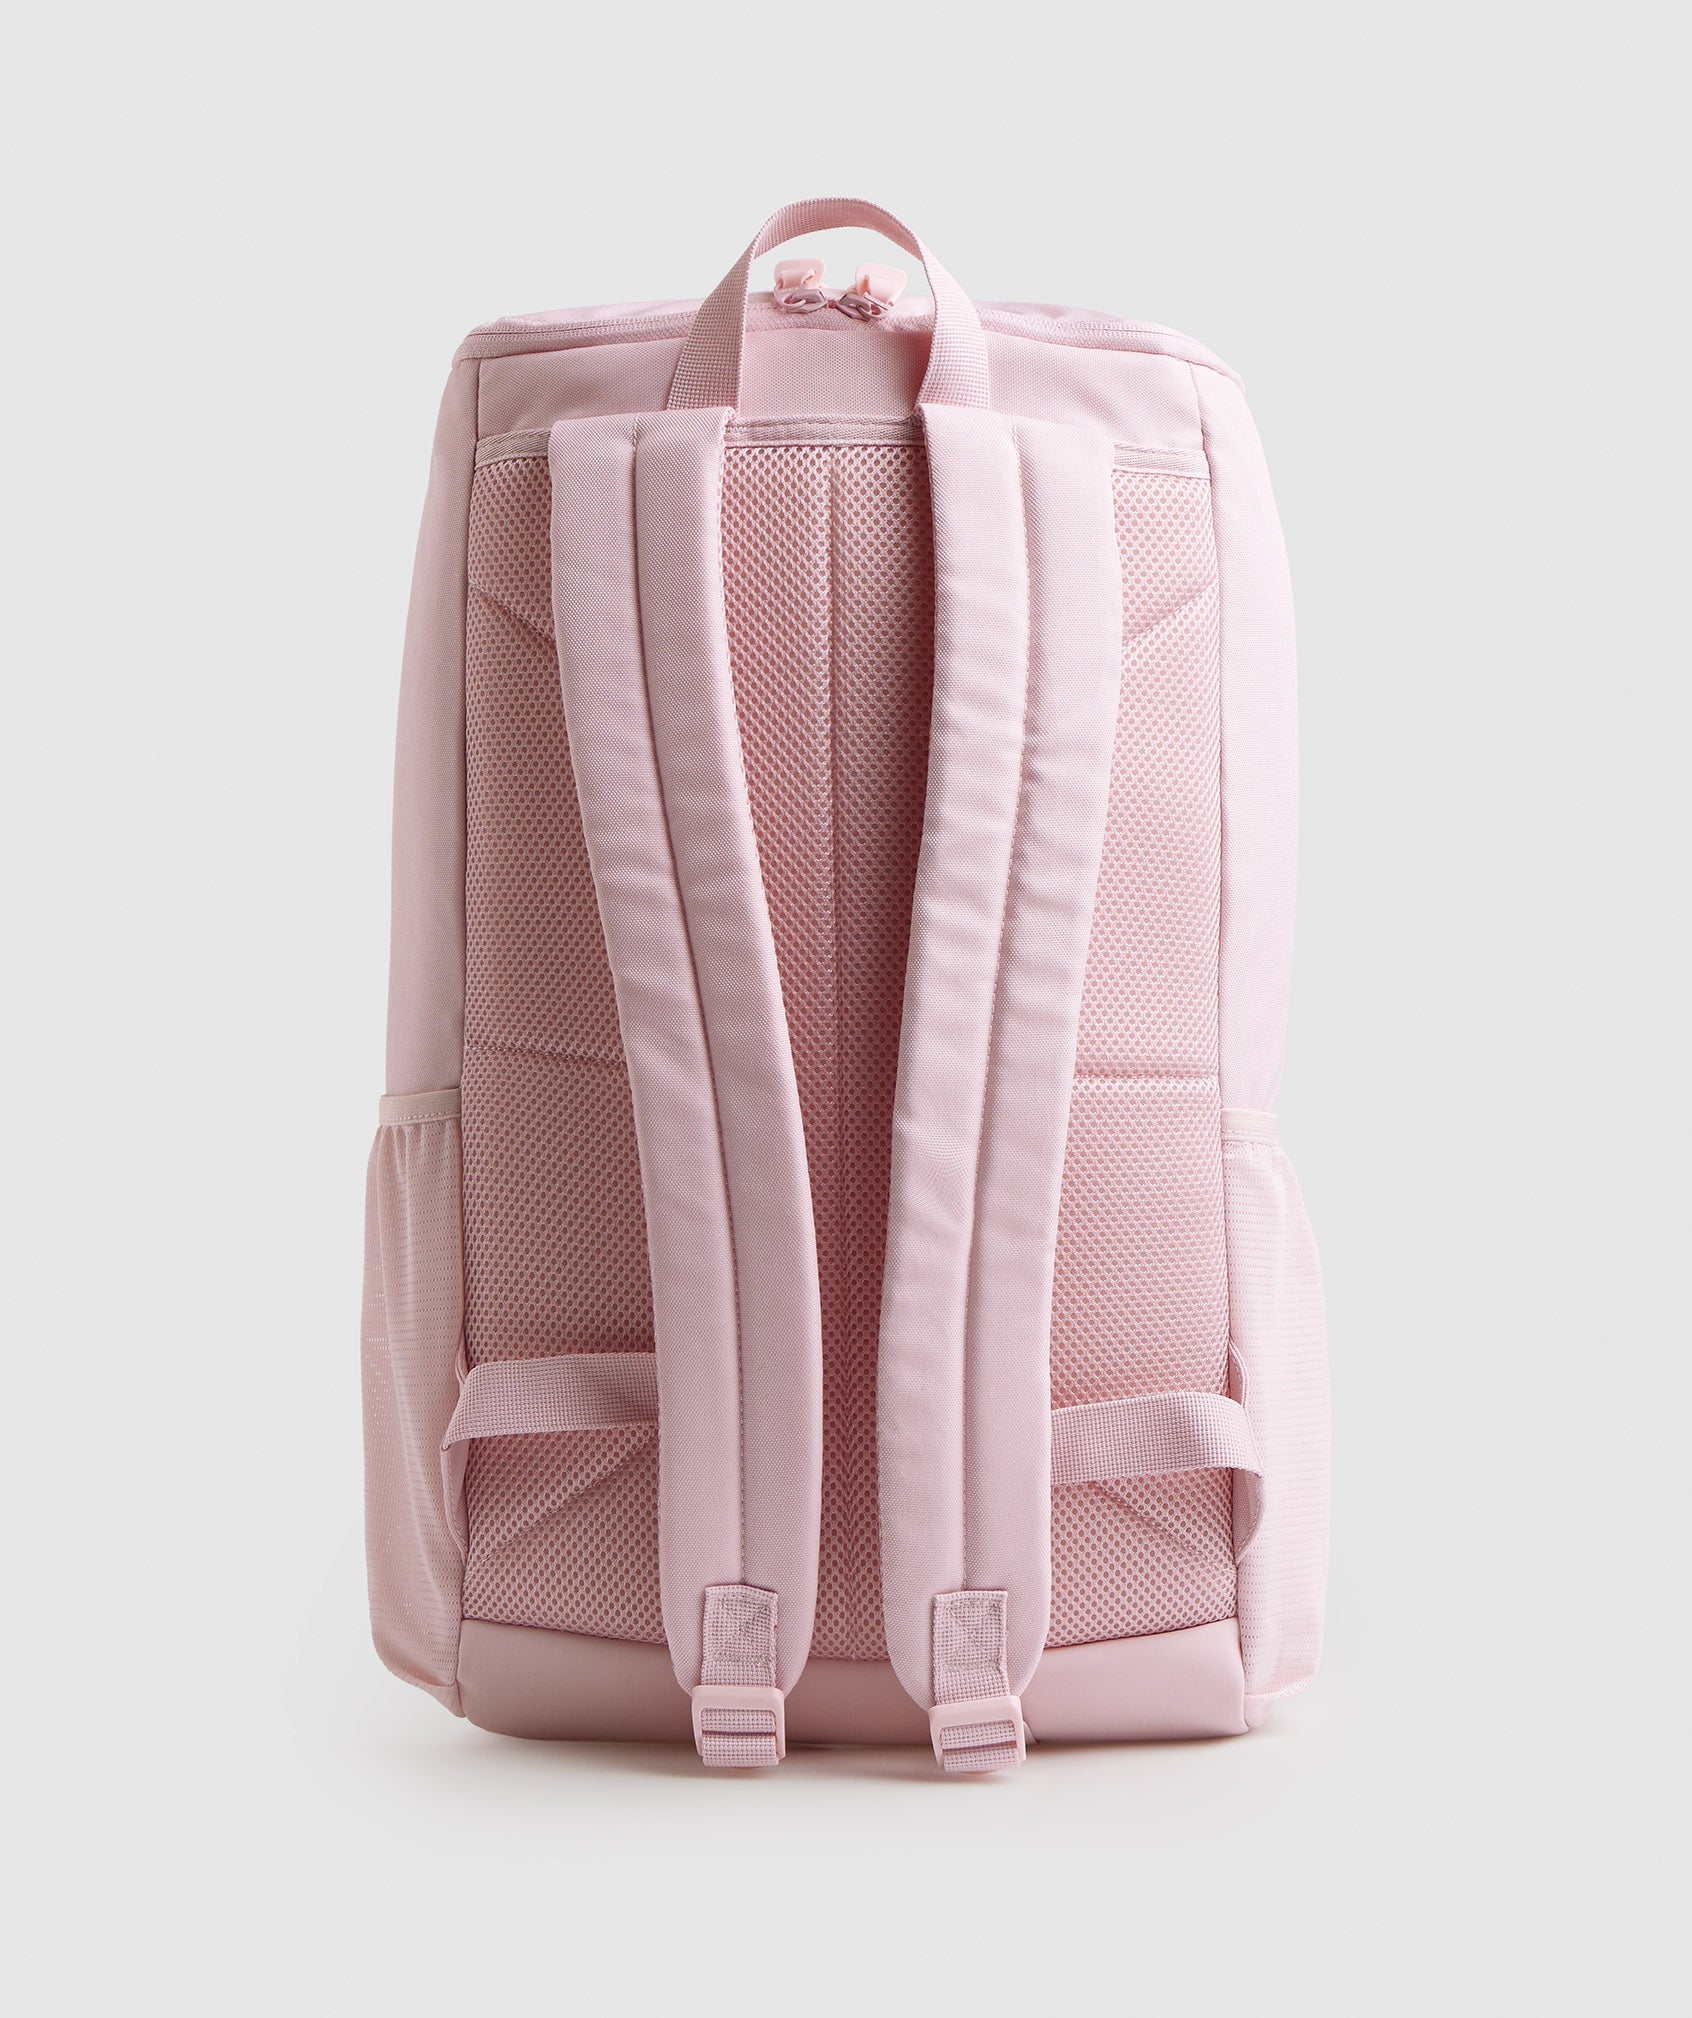 Sharkhead Backpack in Sweet Pink - view 5